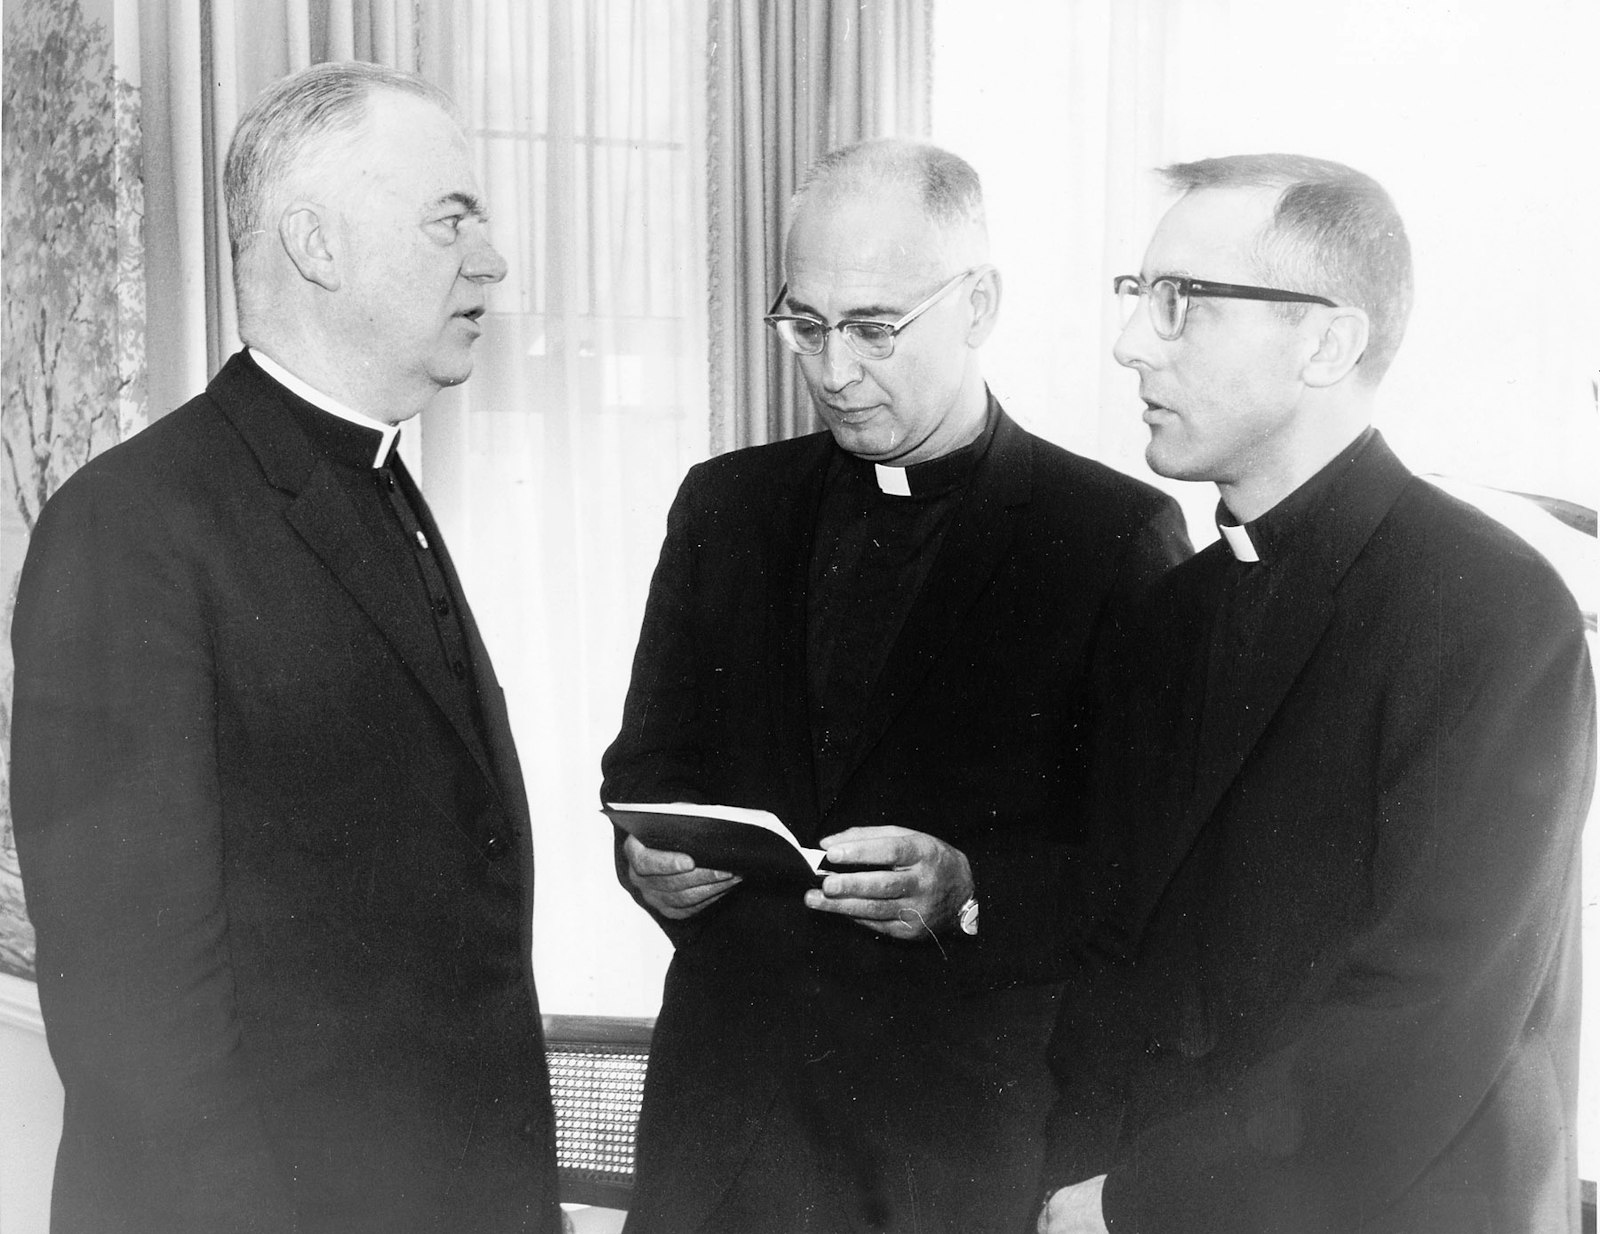 Bishop Thomas Gumbleton, right, is pictured with Detroit Cardinal John F. Dearden and Bishop Walter J. Schoenherr in this file photo.